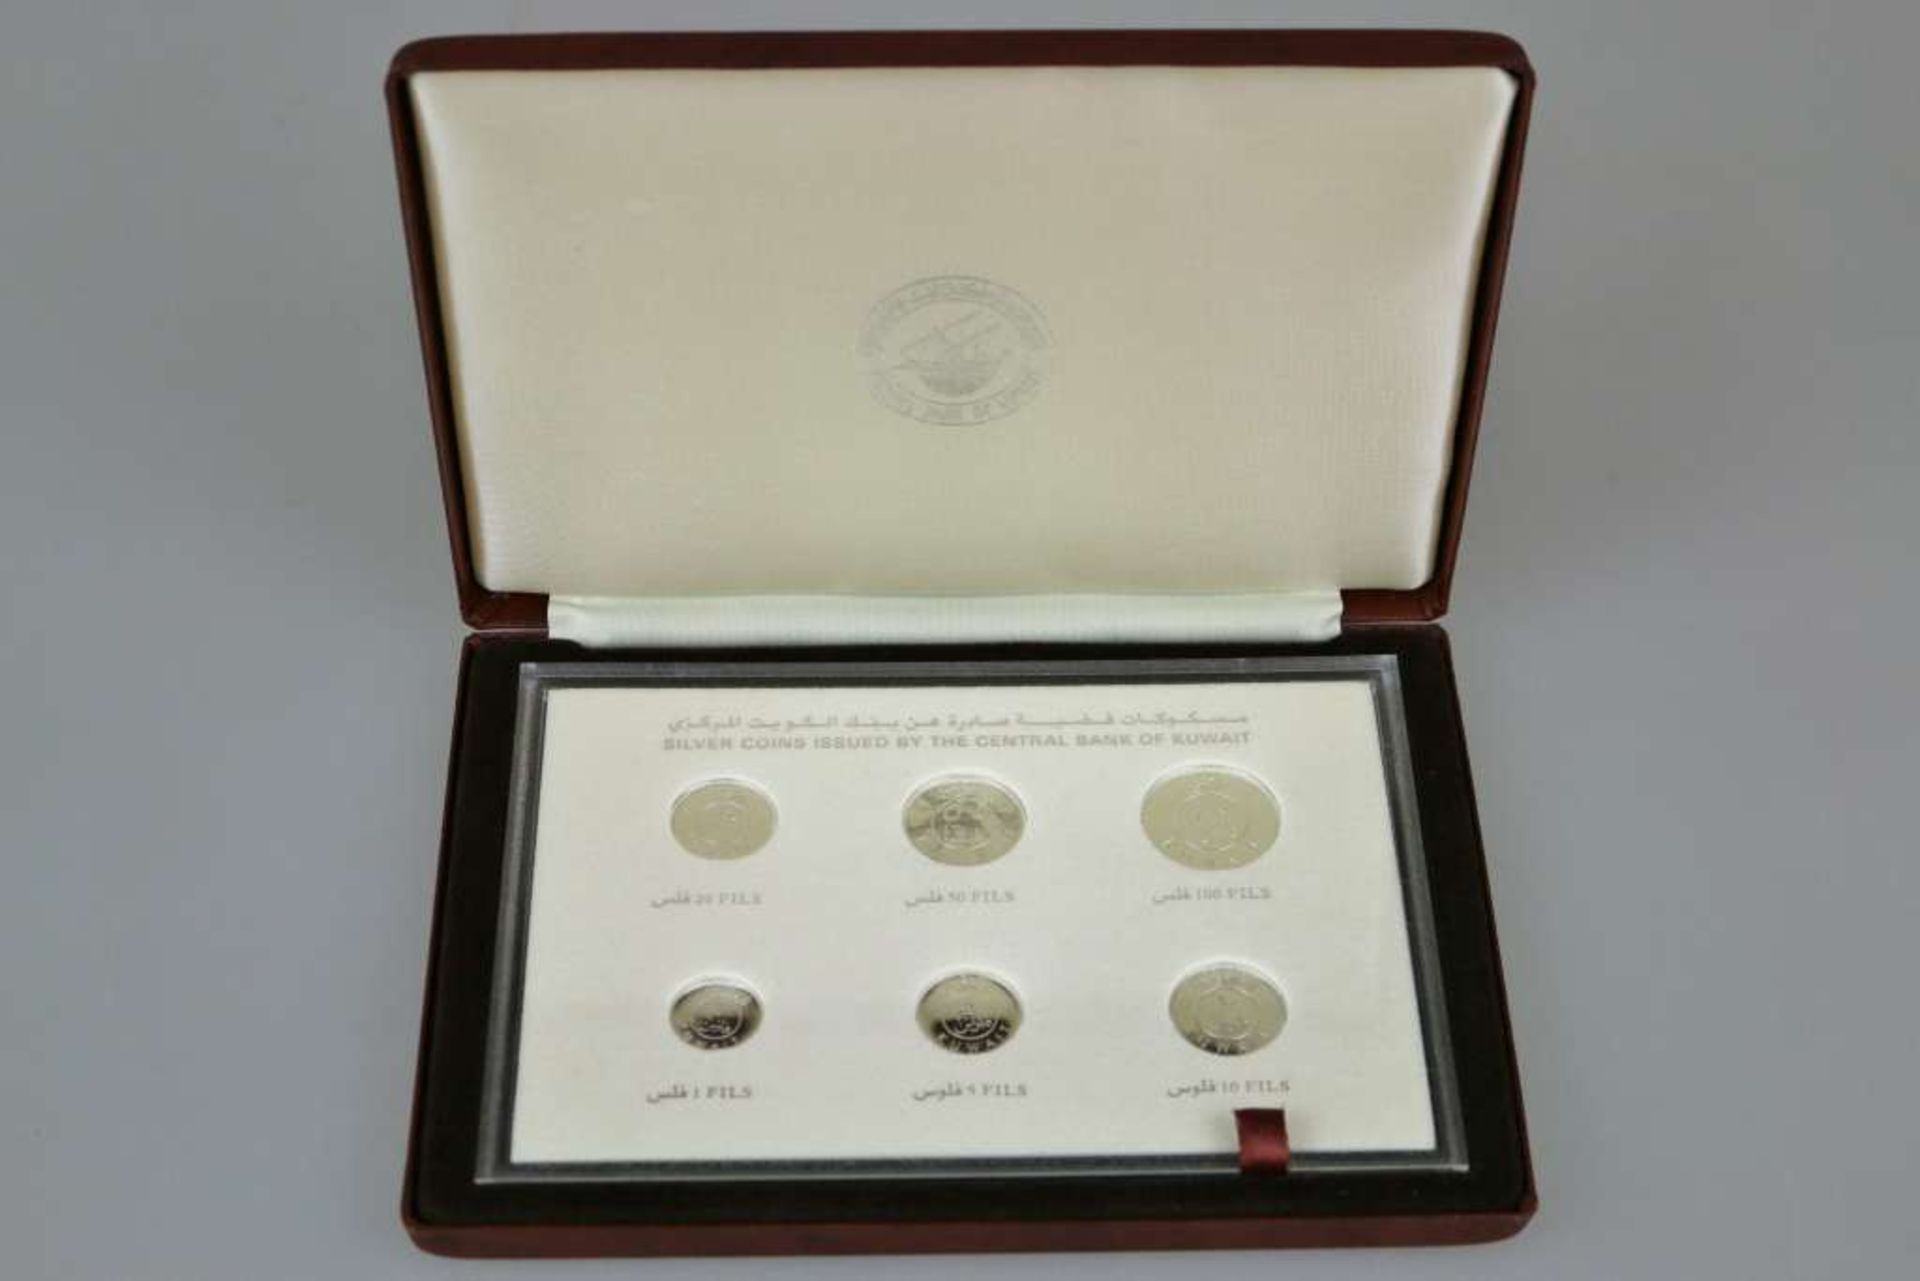 Kuwait, Silver Proof Set, issued by the central bank of Kuwait 1987, 6 Münzen, 1, 5, 10, 20, 50